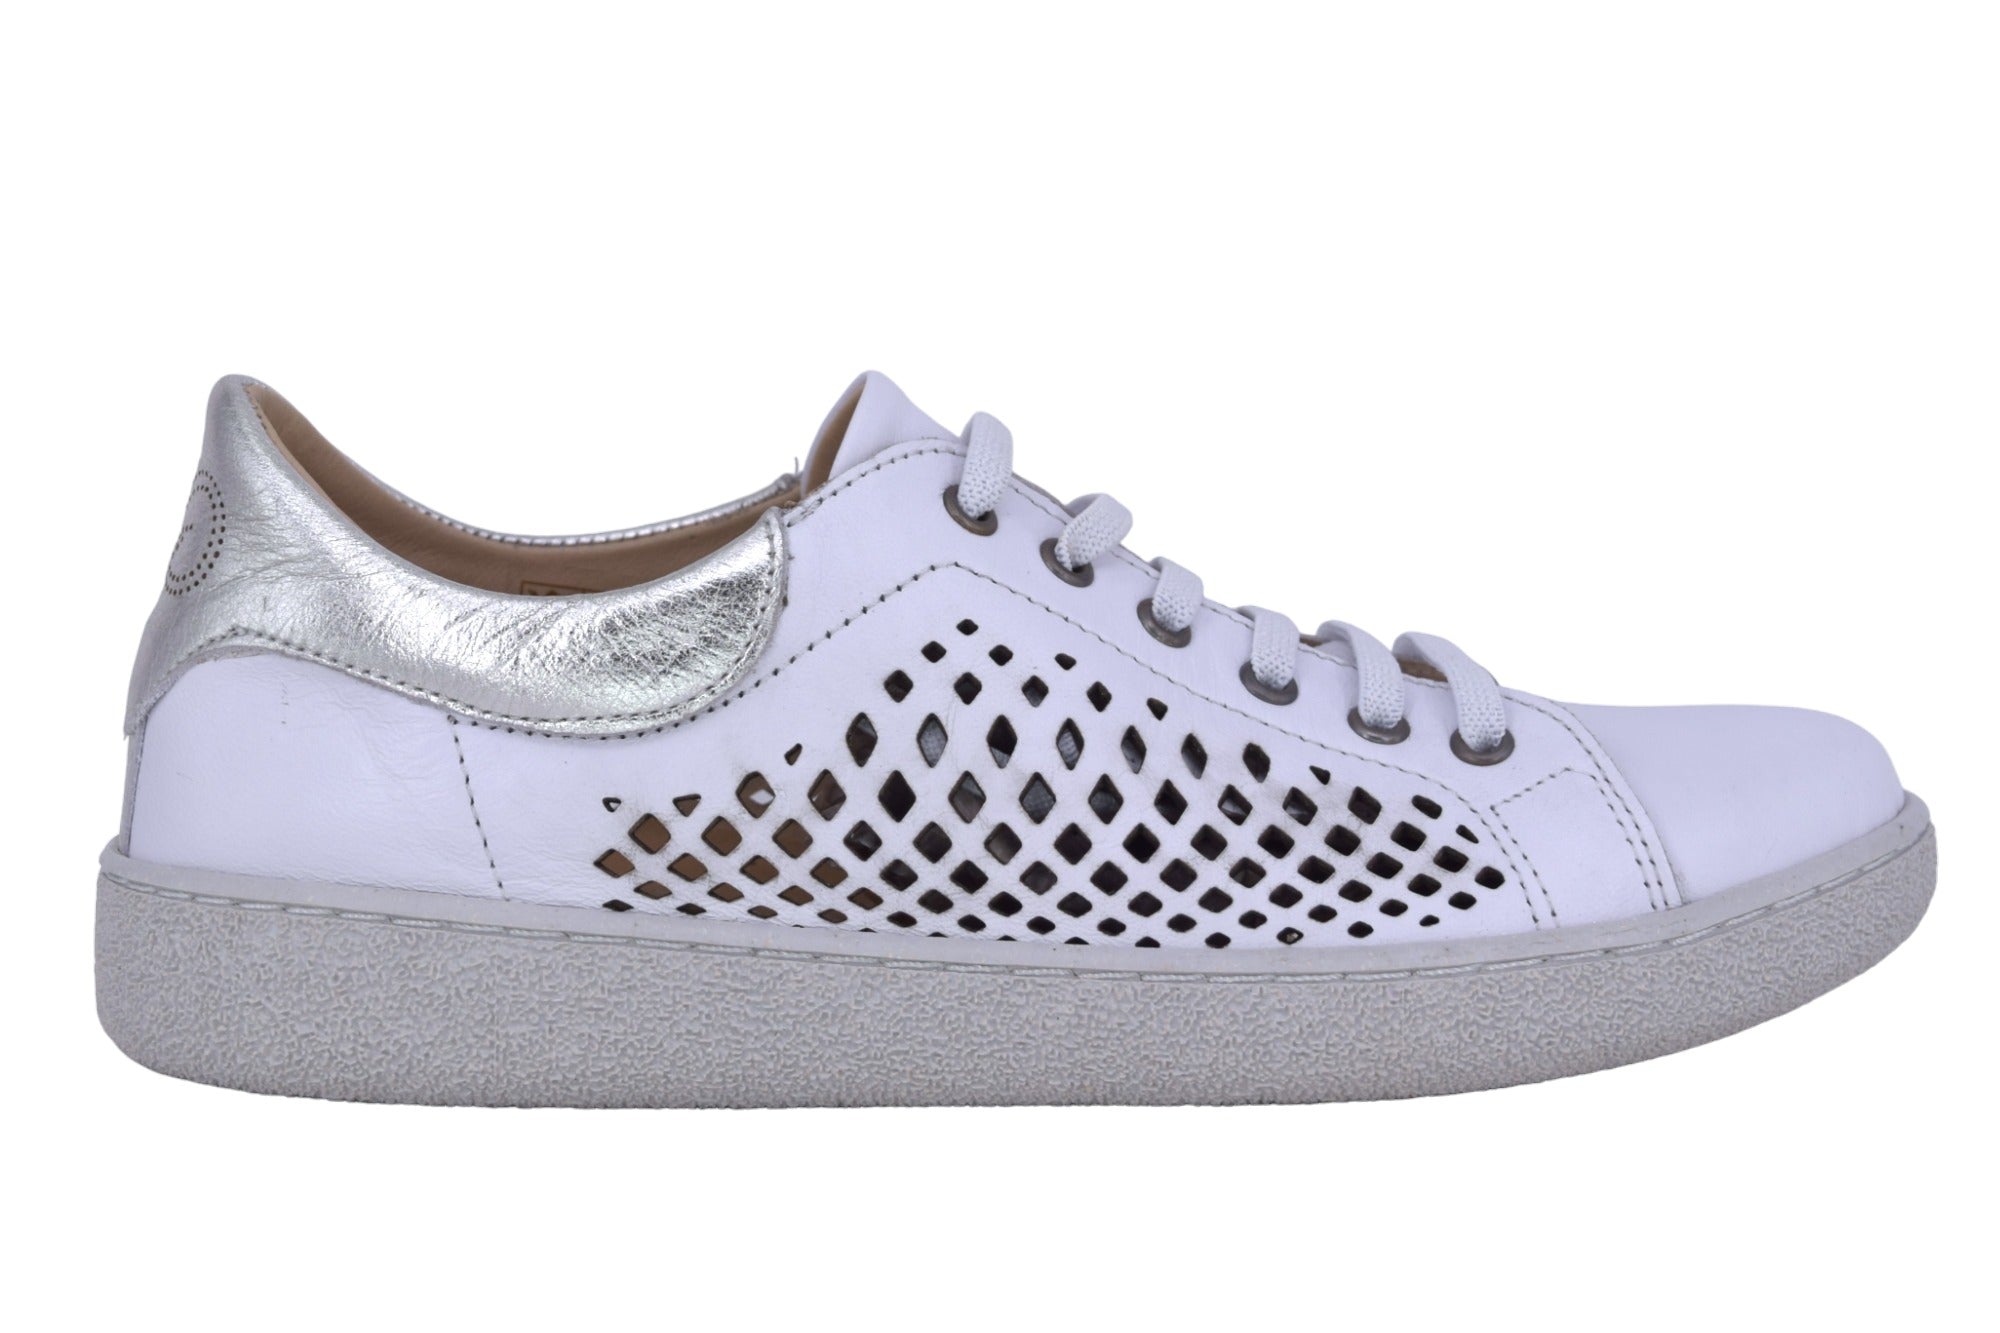 Rilassare Tabbs Lace Up Leather Sneaker - Women's